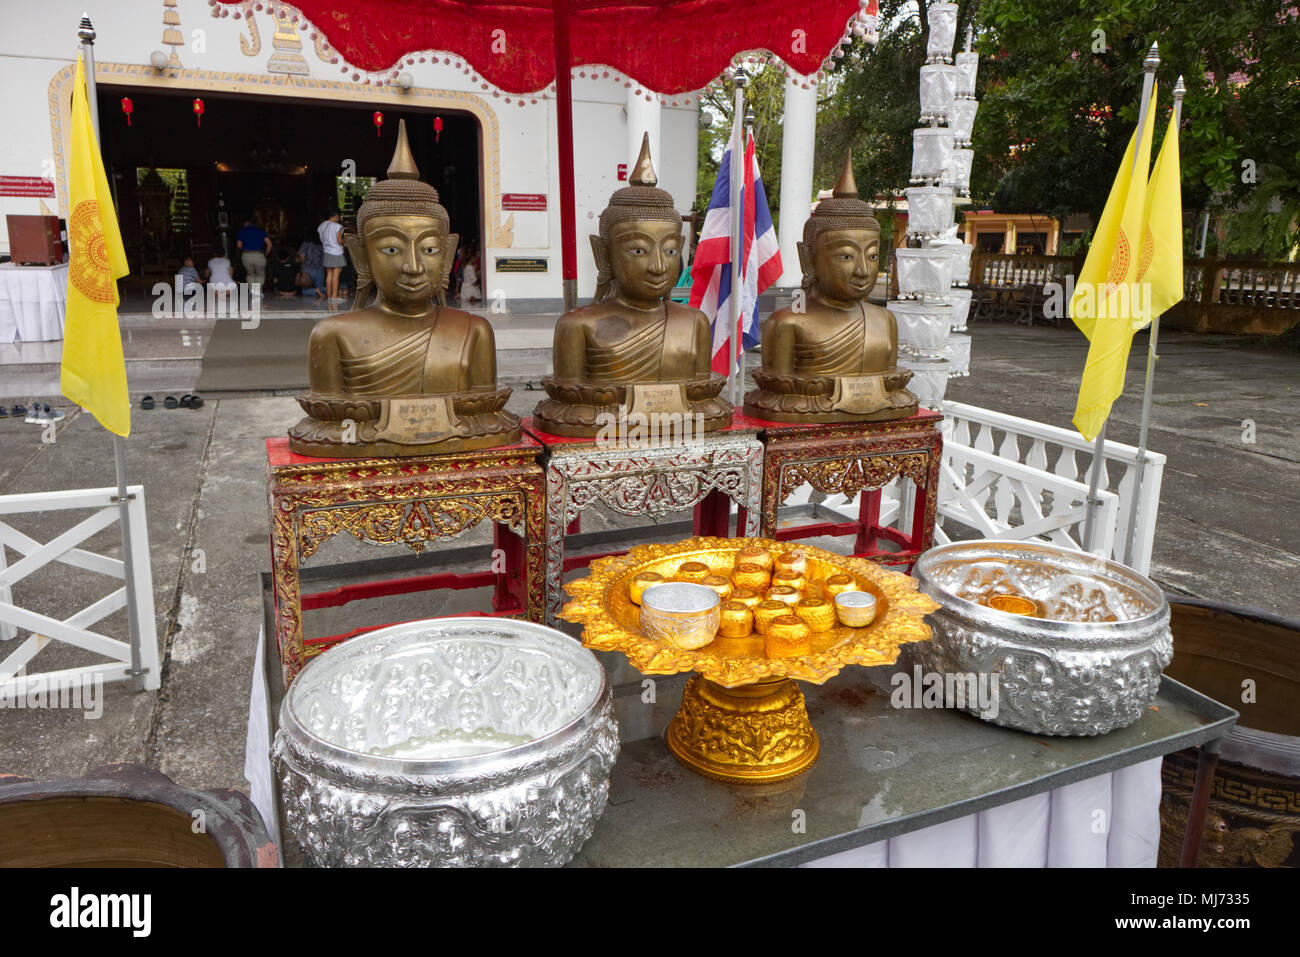 Thaland, Phuket / Thailand - April 11 2018 : Statues of Buddha are resting on a table in front of the Wat Phra Tong temple for worshippers to offer th Stock Photo